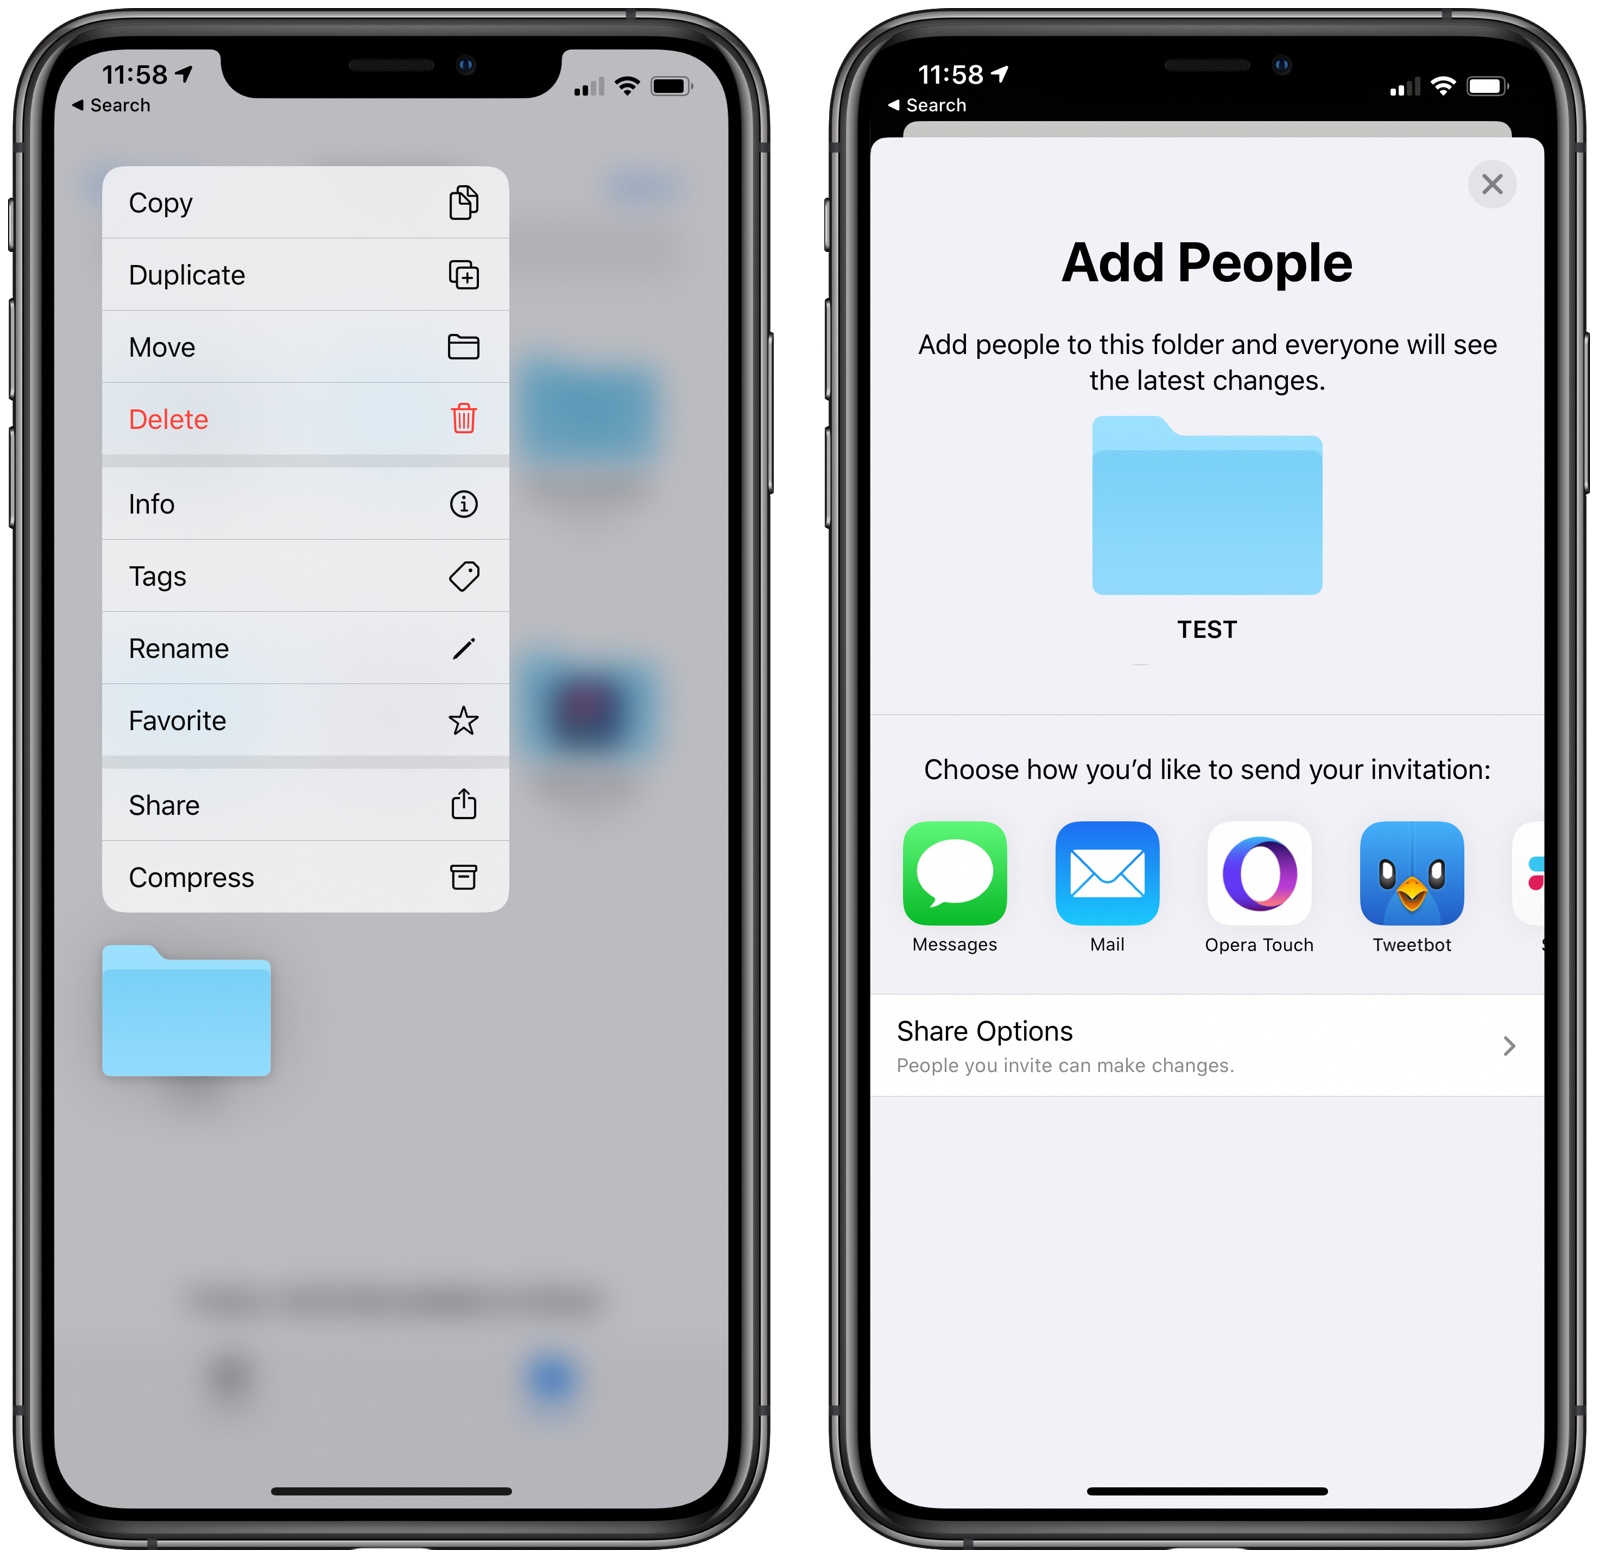 Apple Seeds First Public Betas of iOS and iPadOS 13.4 With New Mail Toolbar, iCloud Folder Sharing and More... thumbnail